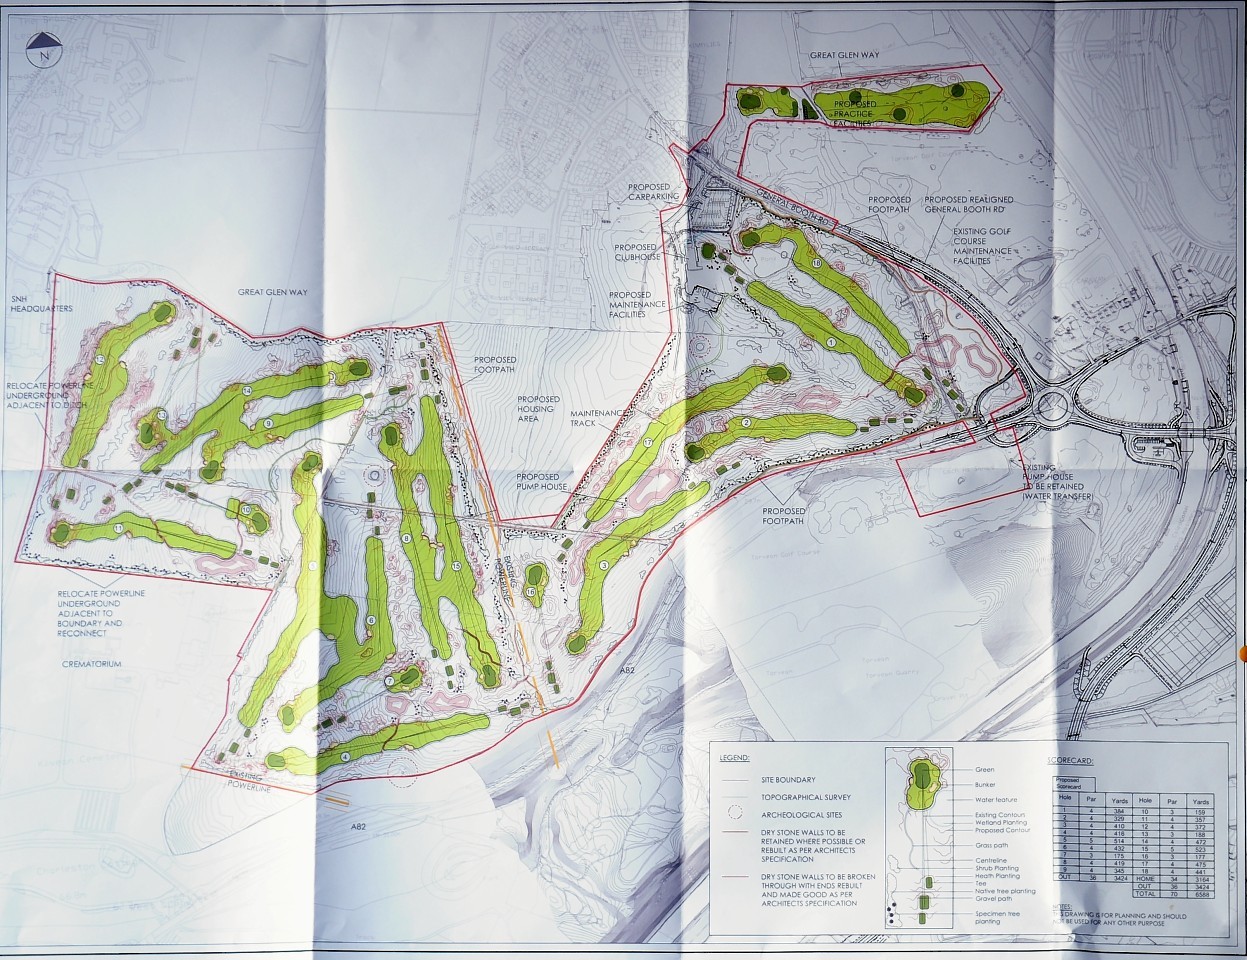 The plans for Torvean Golf Course